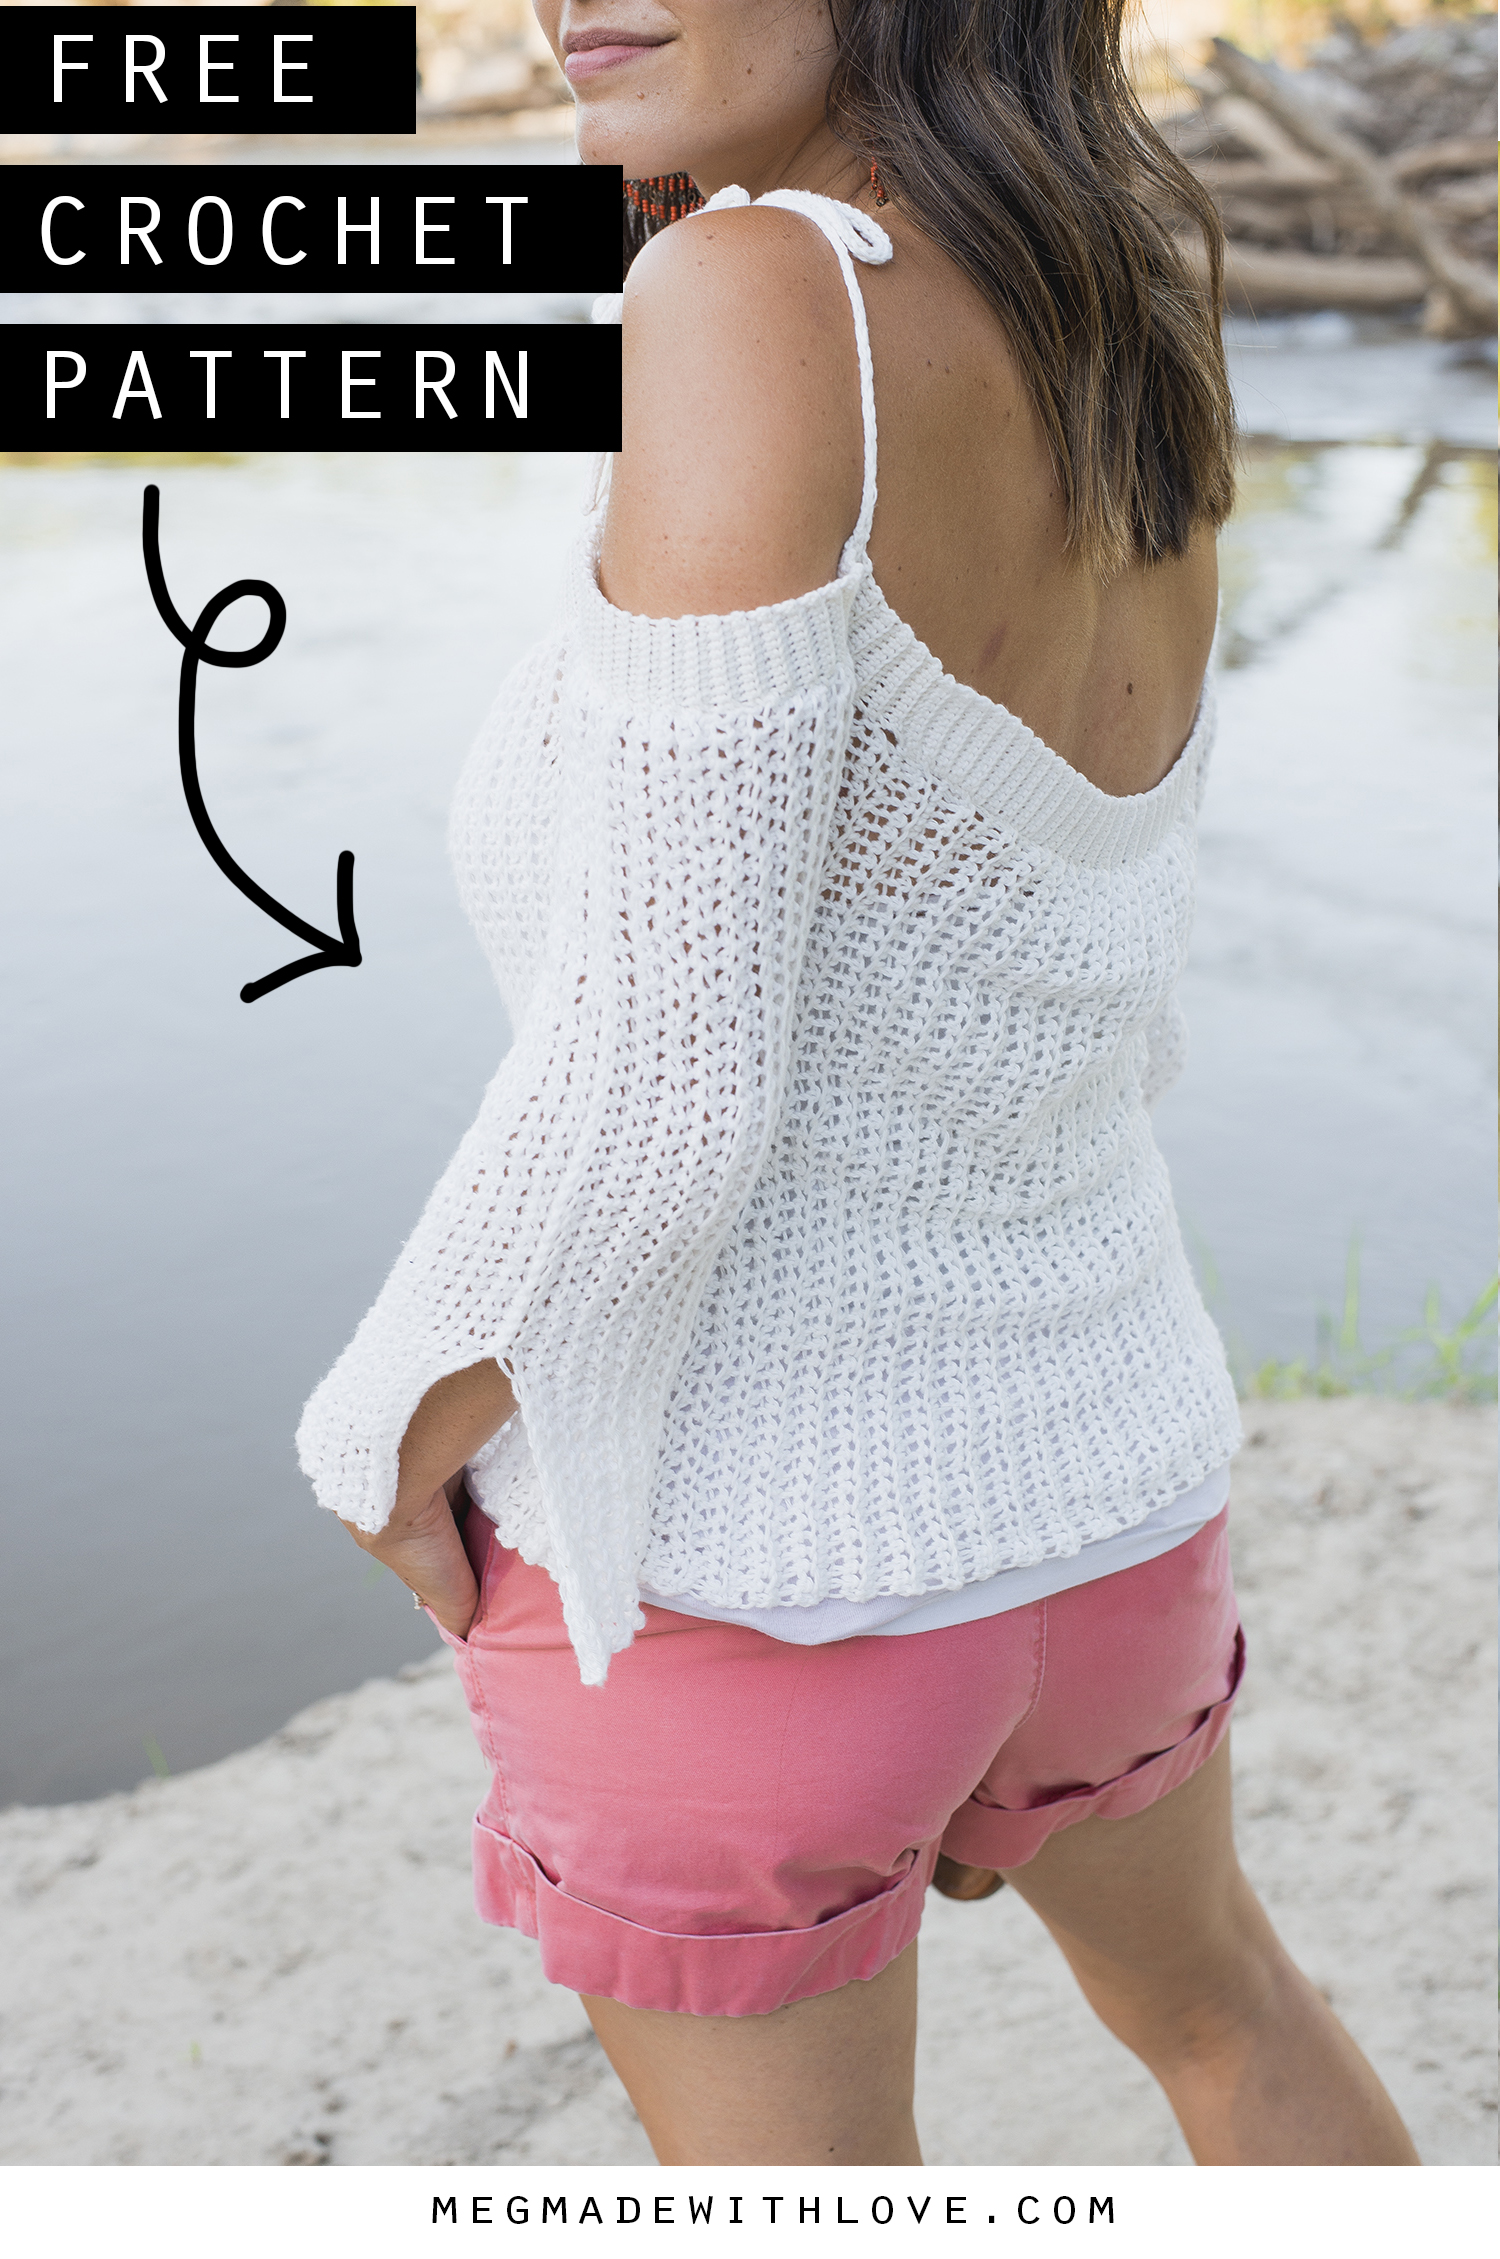 Crochet Top: Summer Tops in Any Length Crochet Patterns: Crochet Top  Patterns To Hit This Summer See more